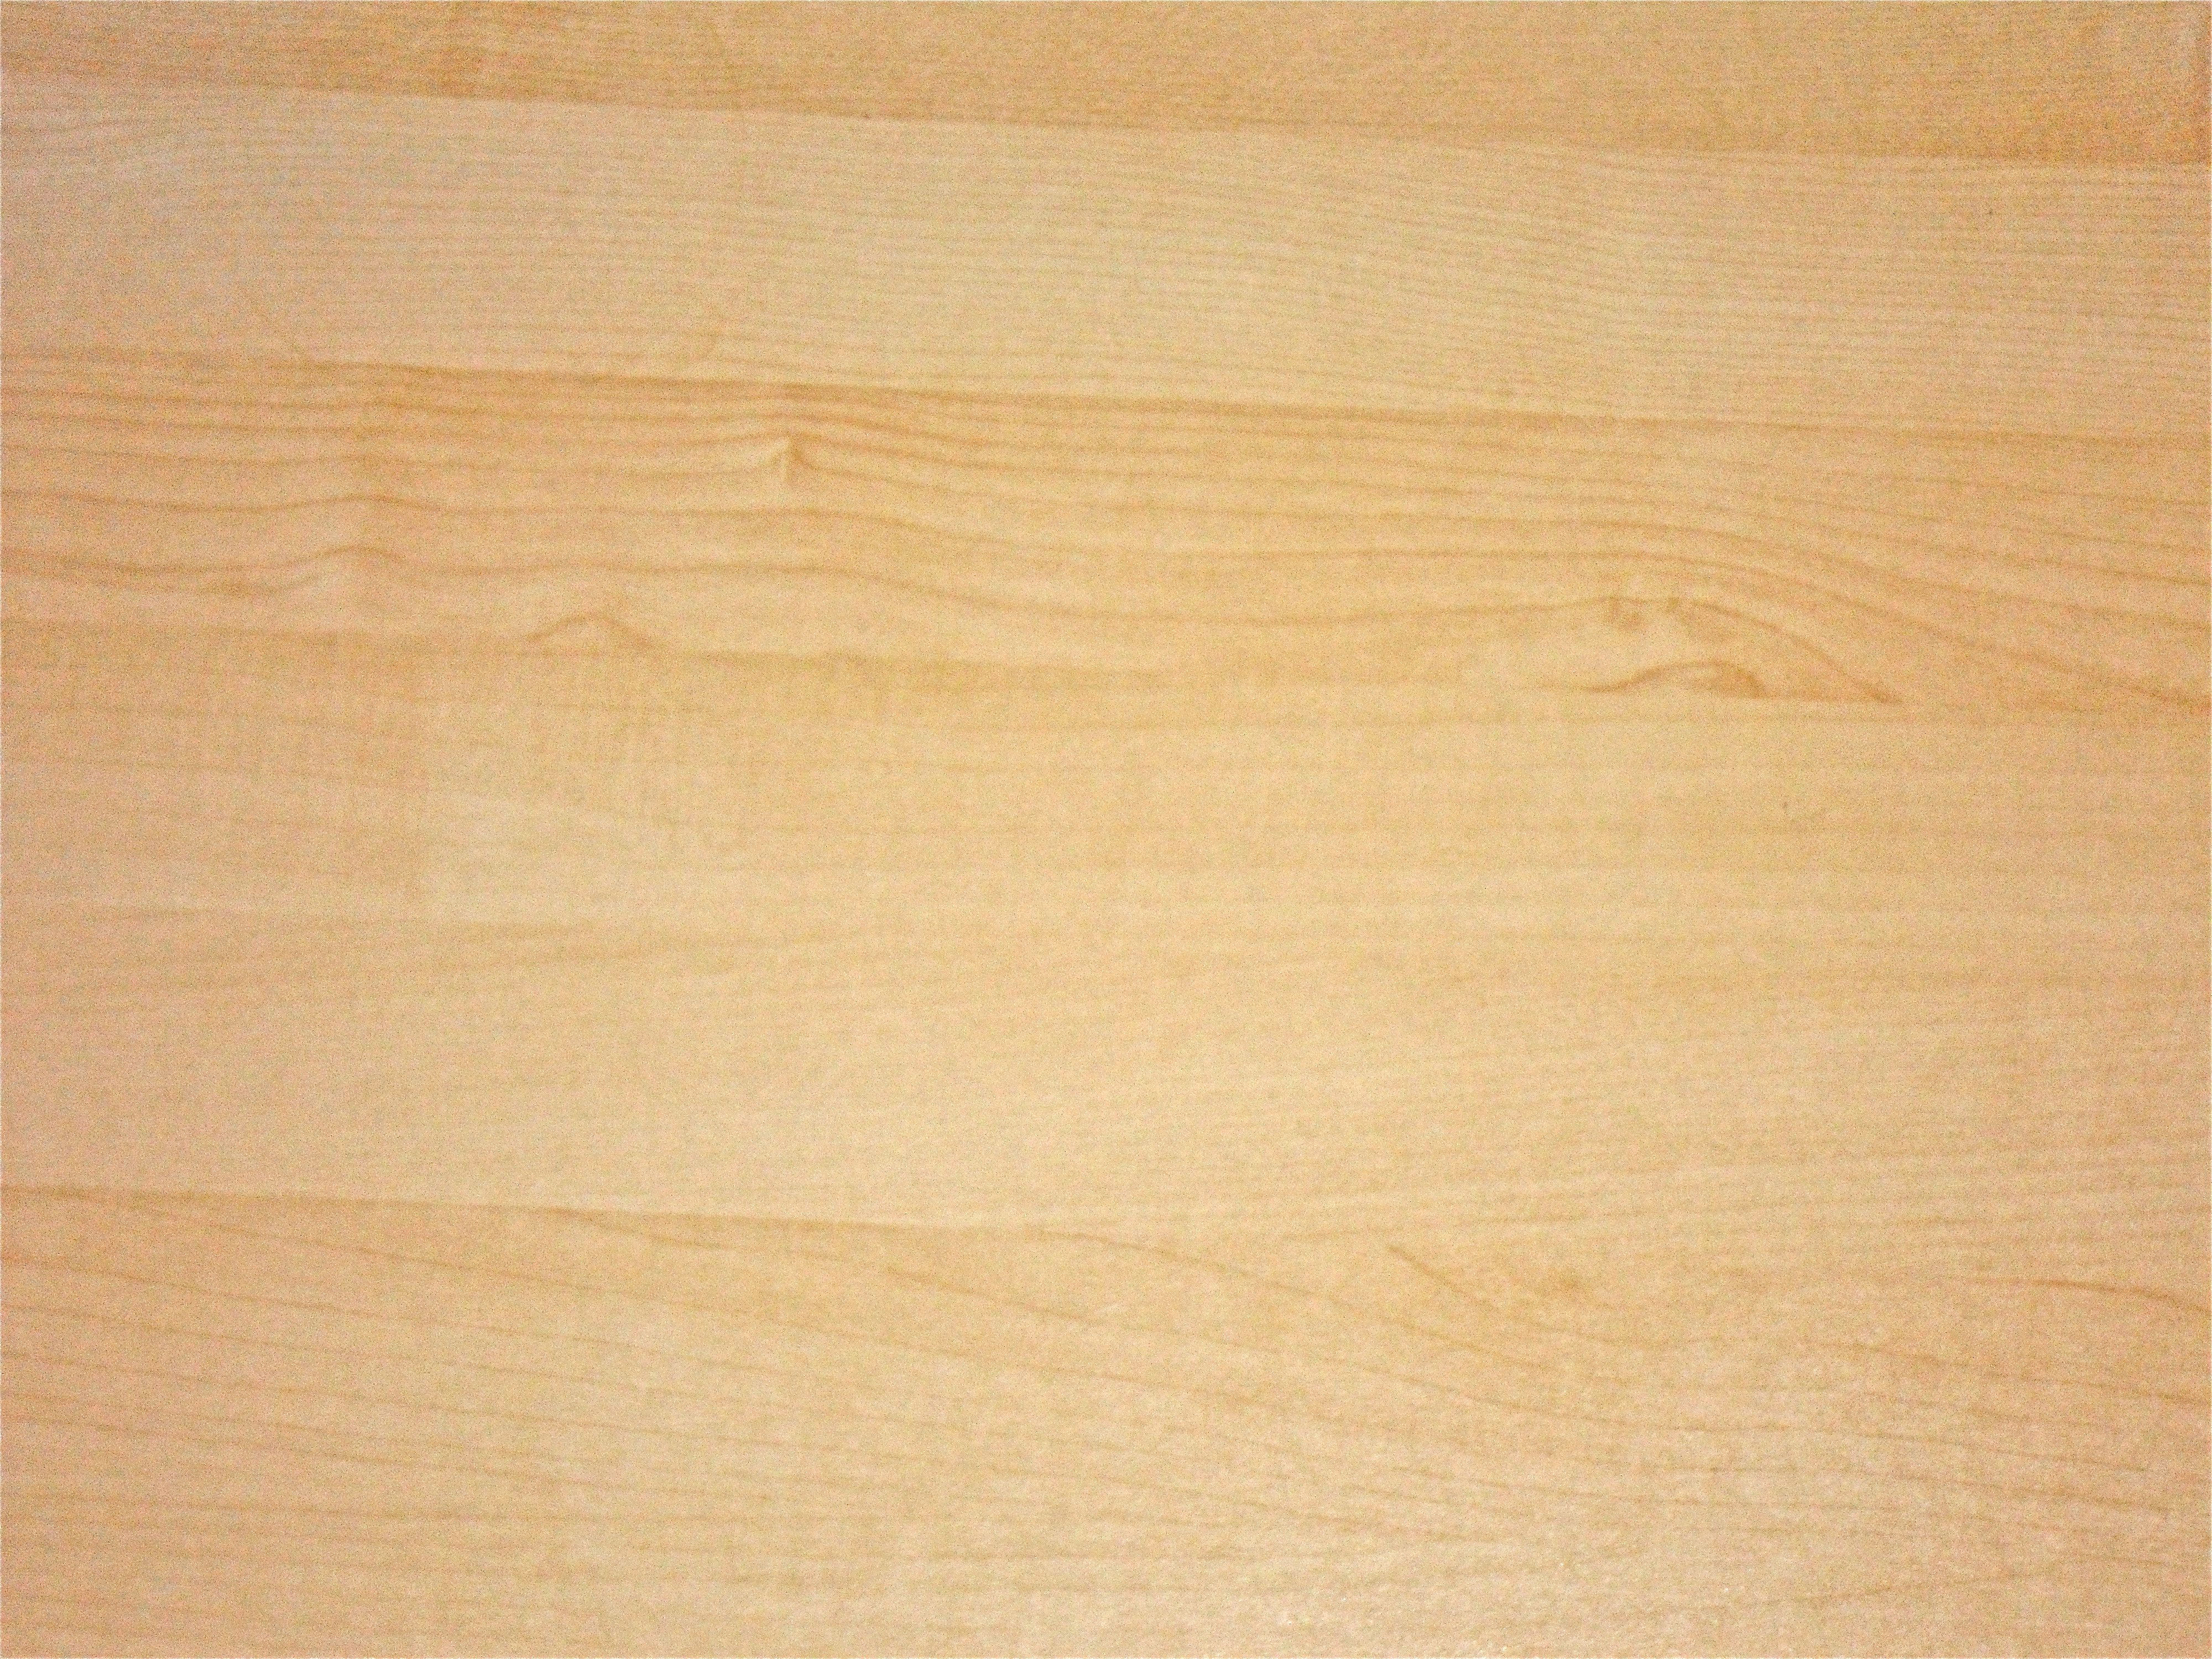 Wooden Background Texture Image